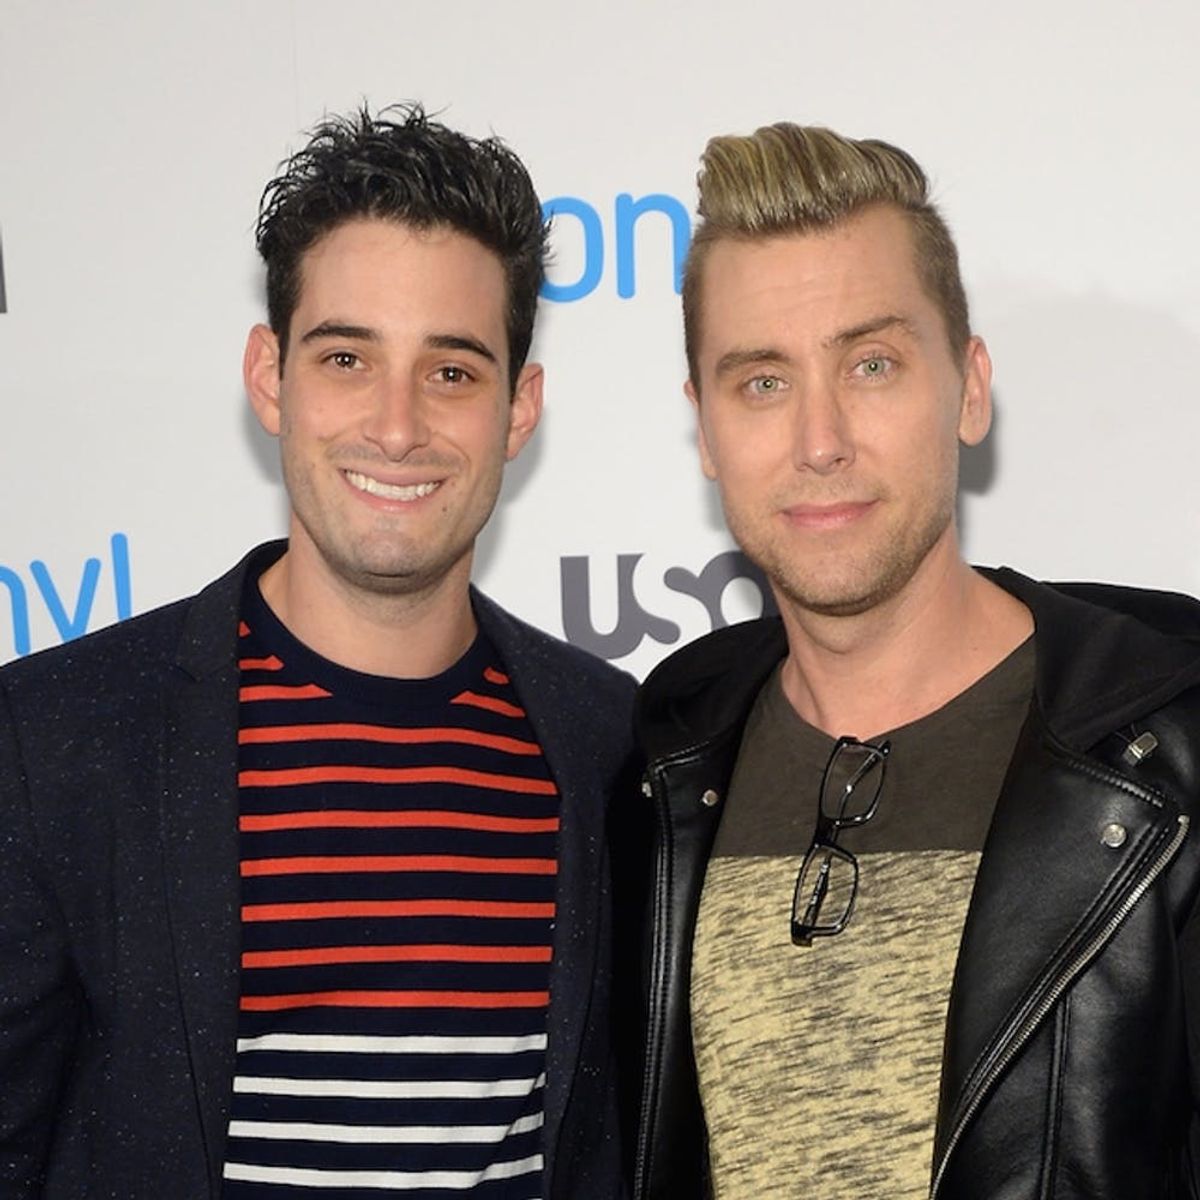 Lance Bass Posted the SWEETEST 1 Year Anniversary Tribute to His Husband